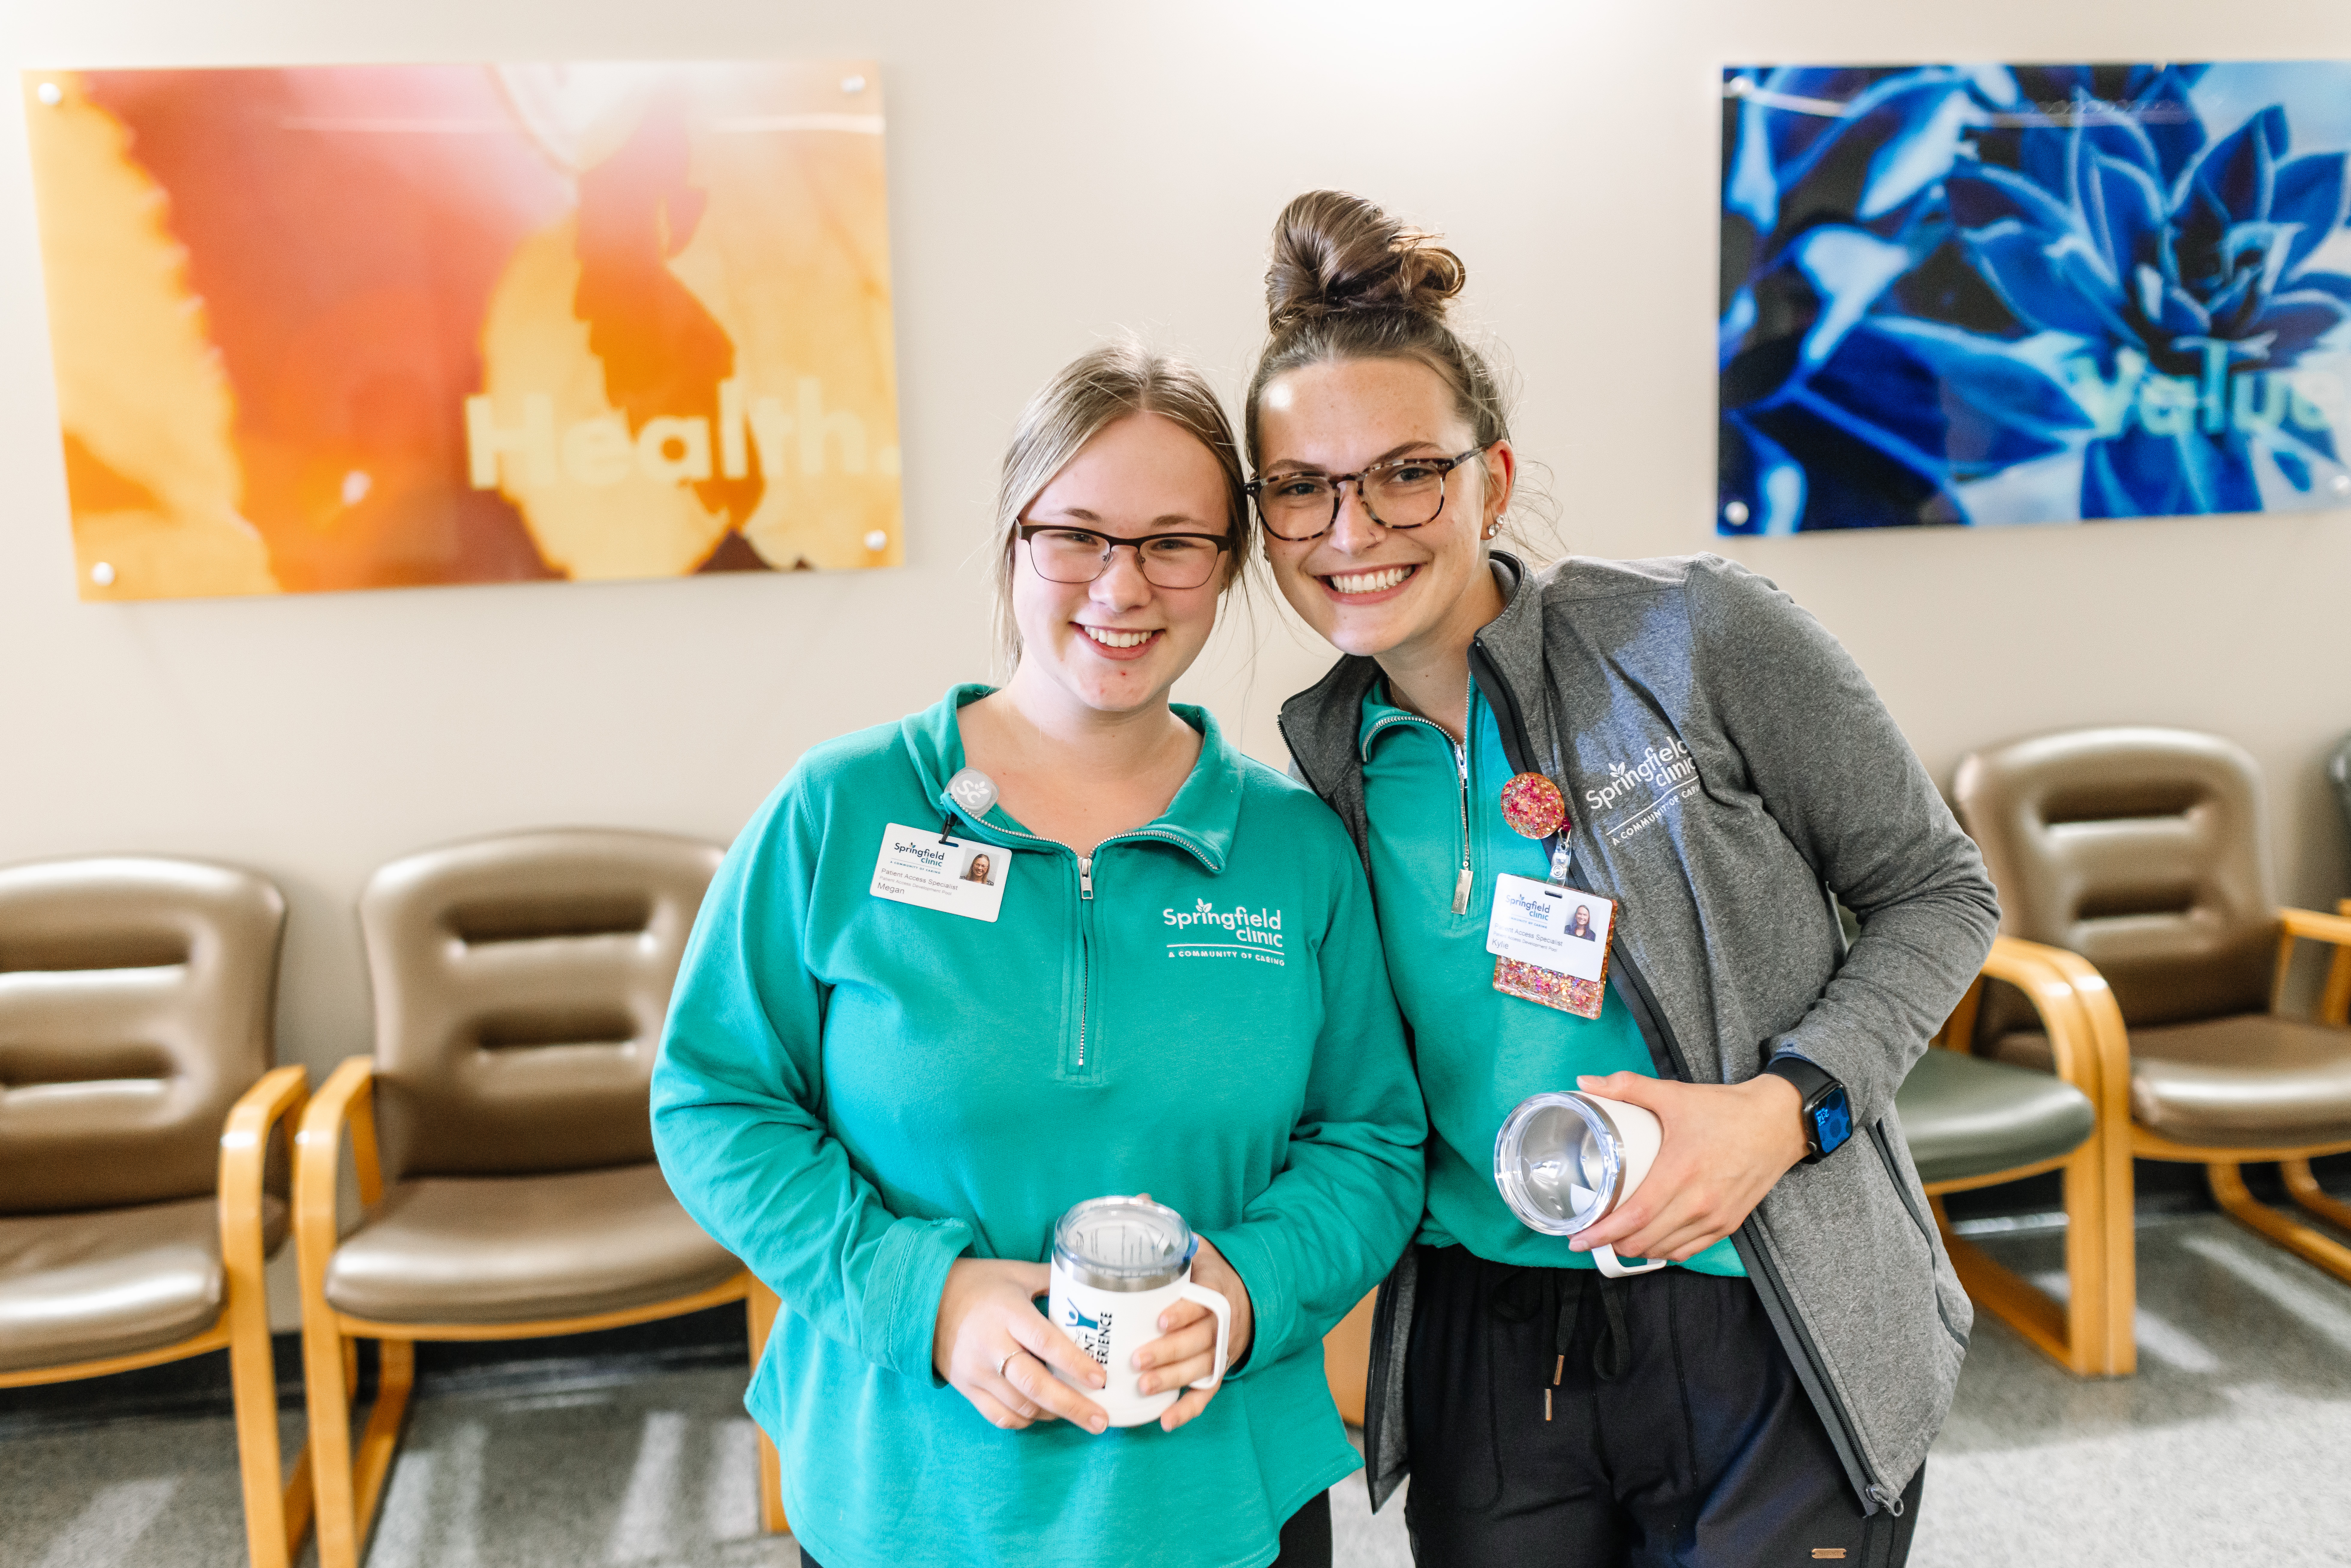 Two Springfield Clinic employees smile while holding their I Am The Patient Experience Mugs they were awarded for exceptional work.